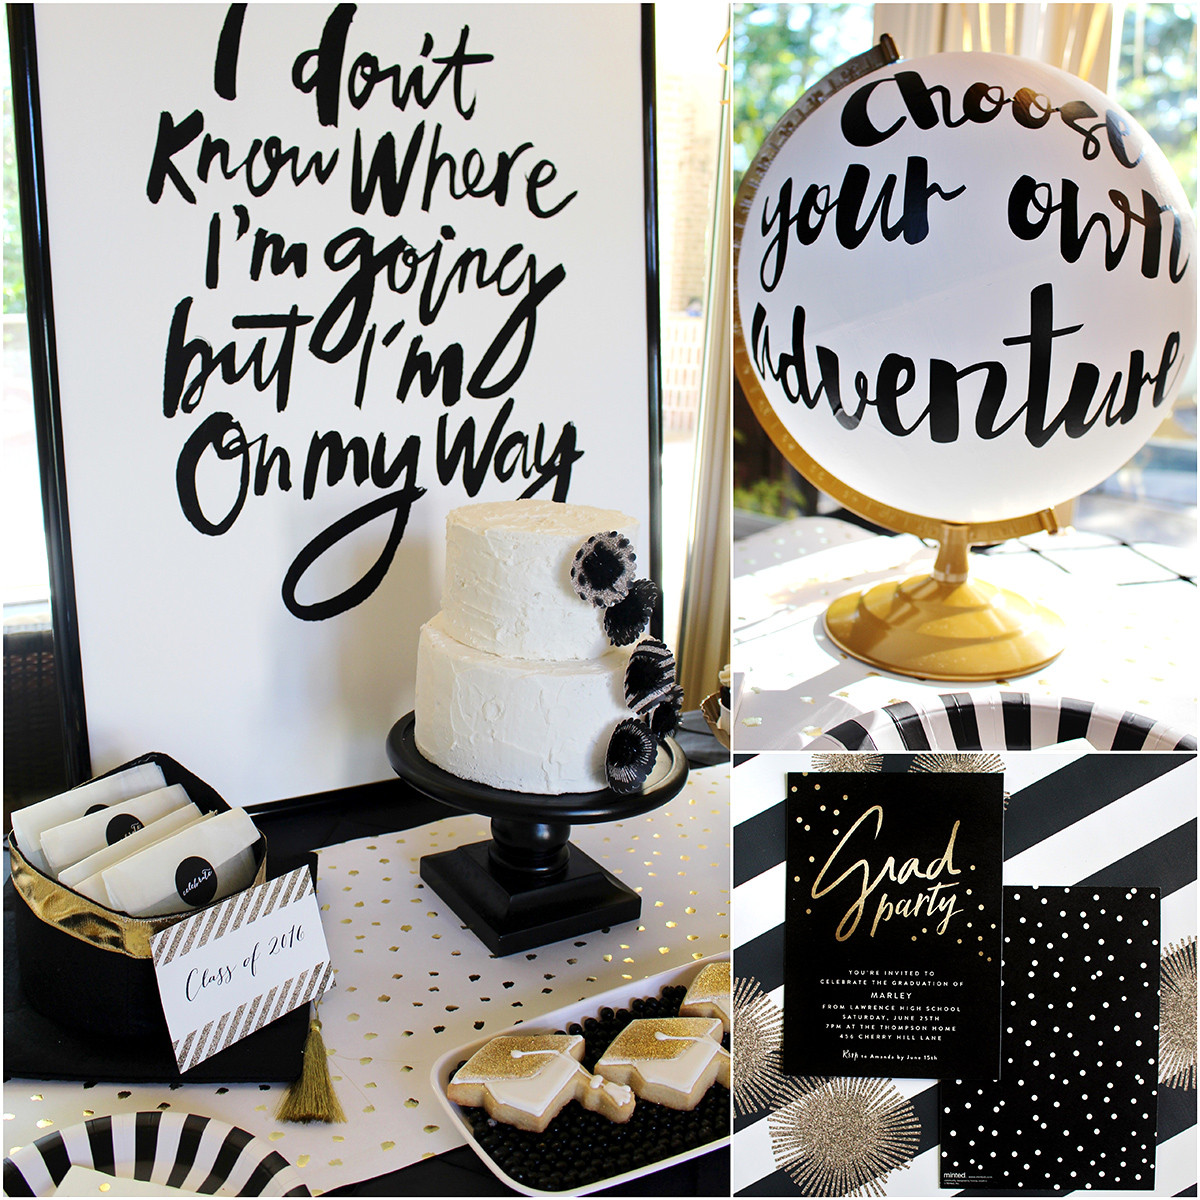 Ideas For High School Graduation Party
 Stylish Black White Gold Graduation Party